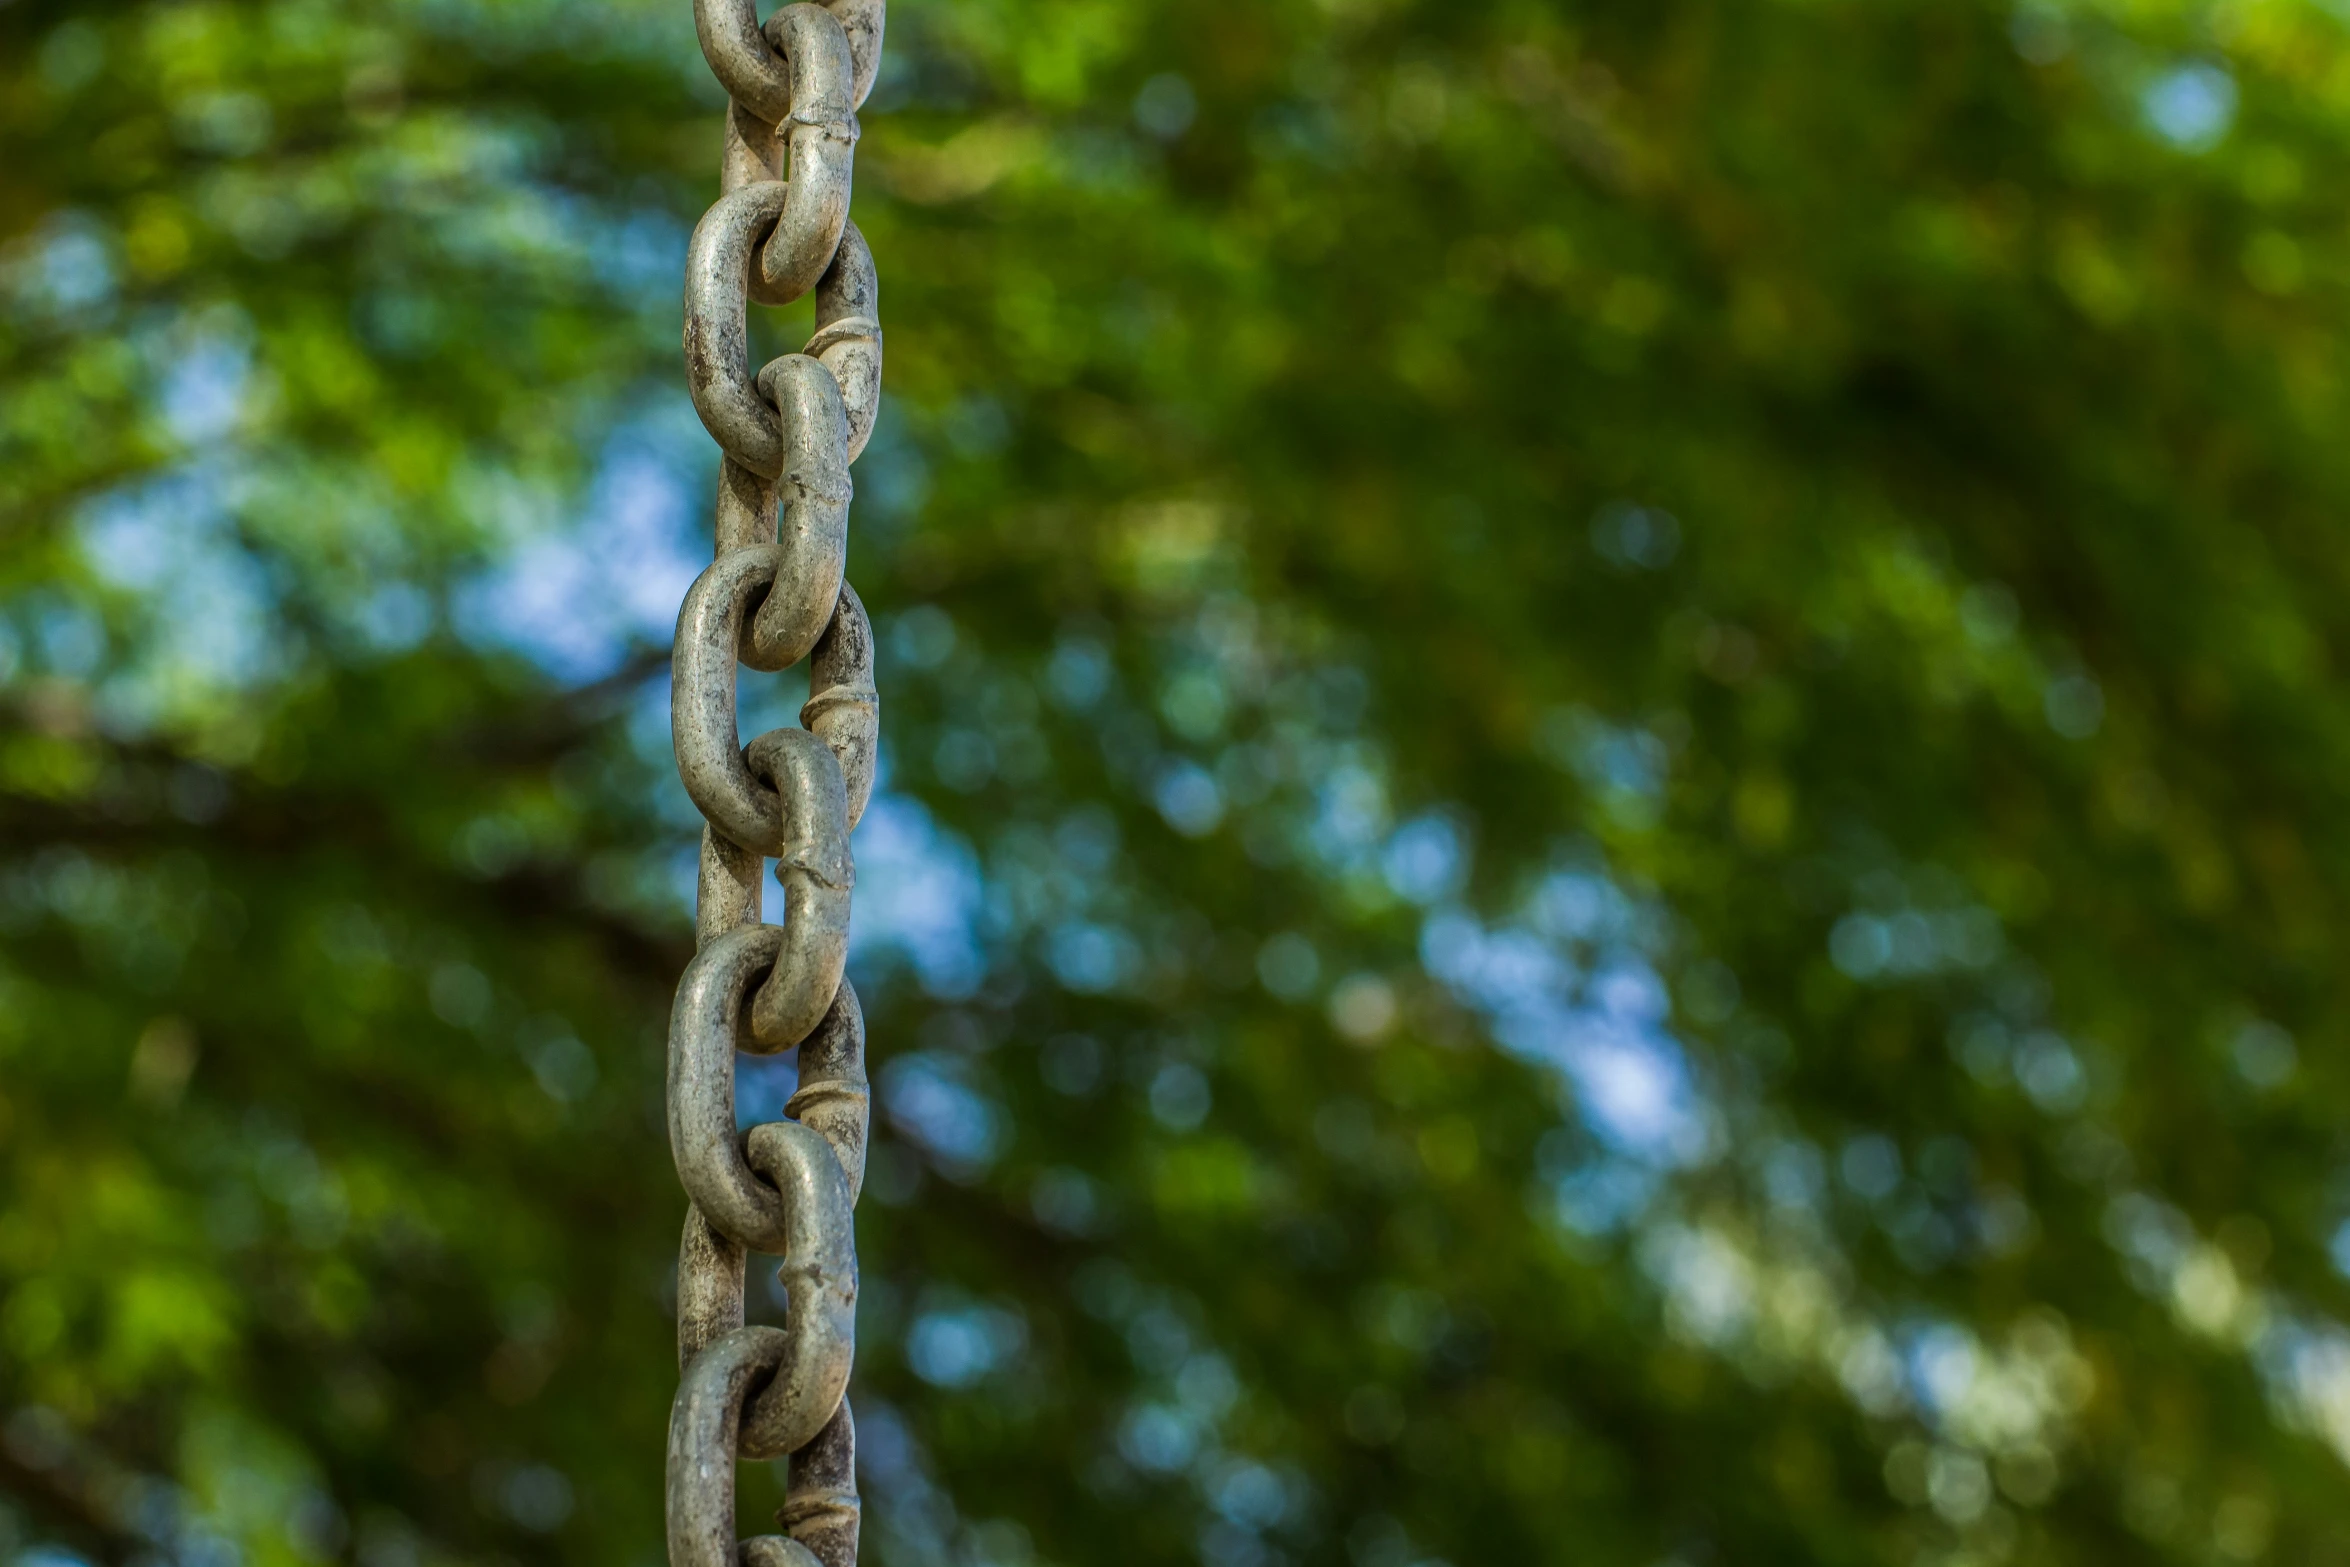 a closeup view of a chain link hanging from a tree